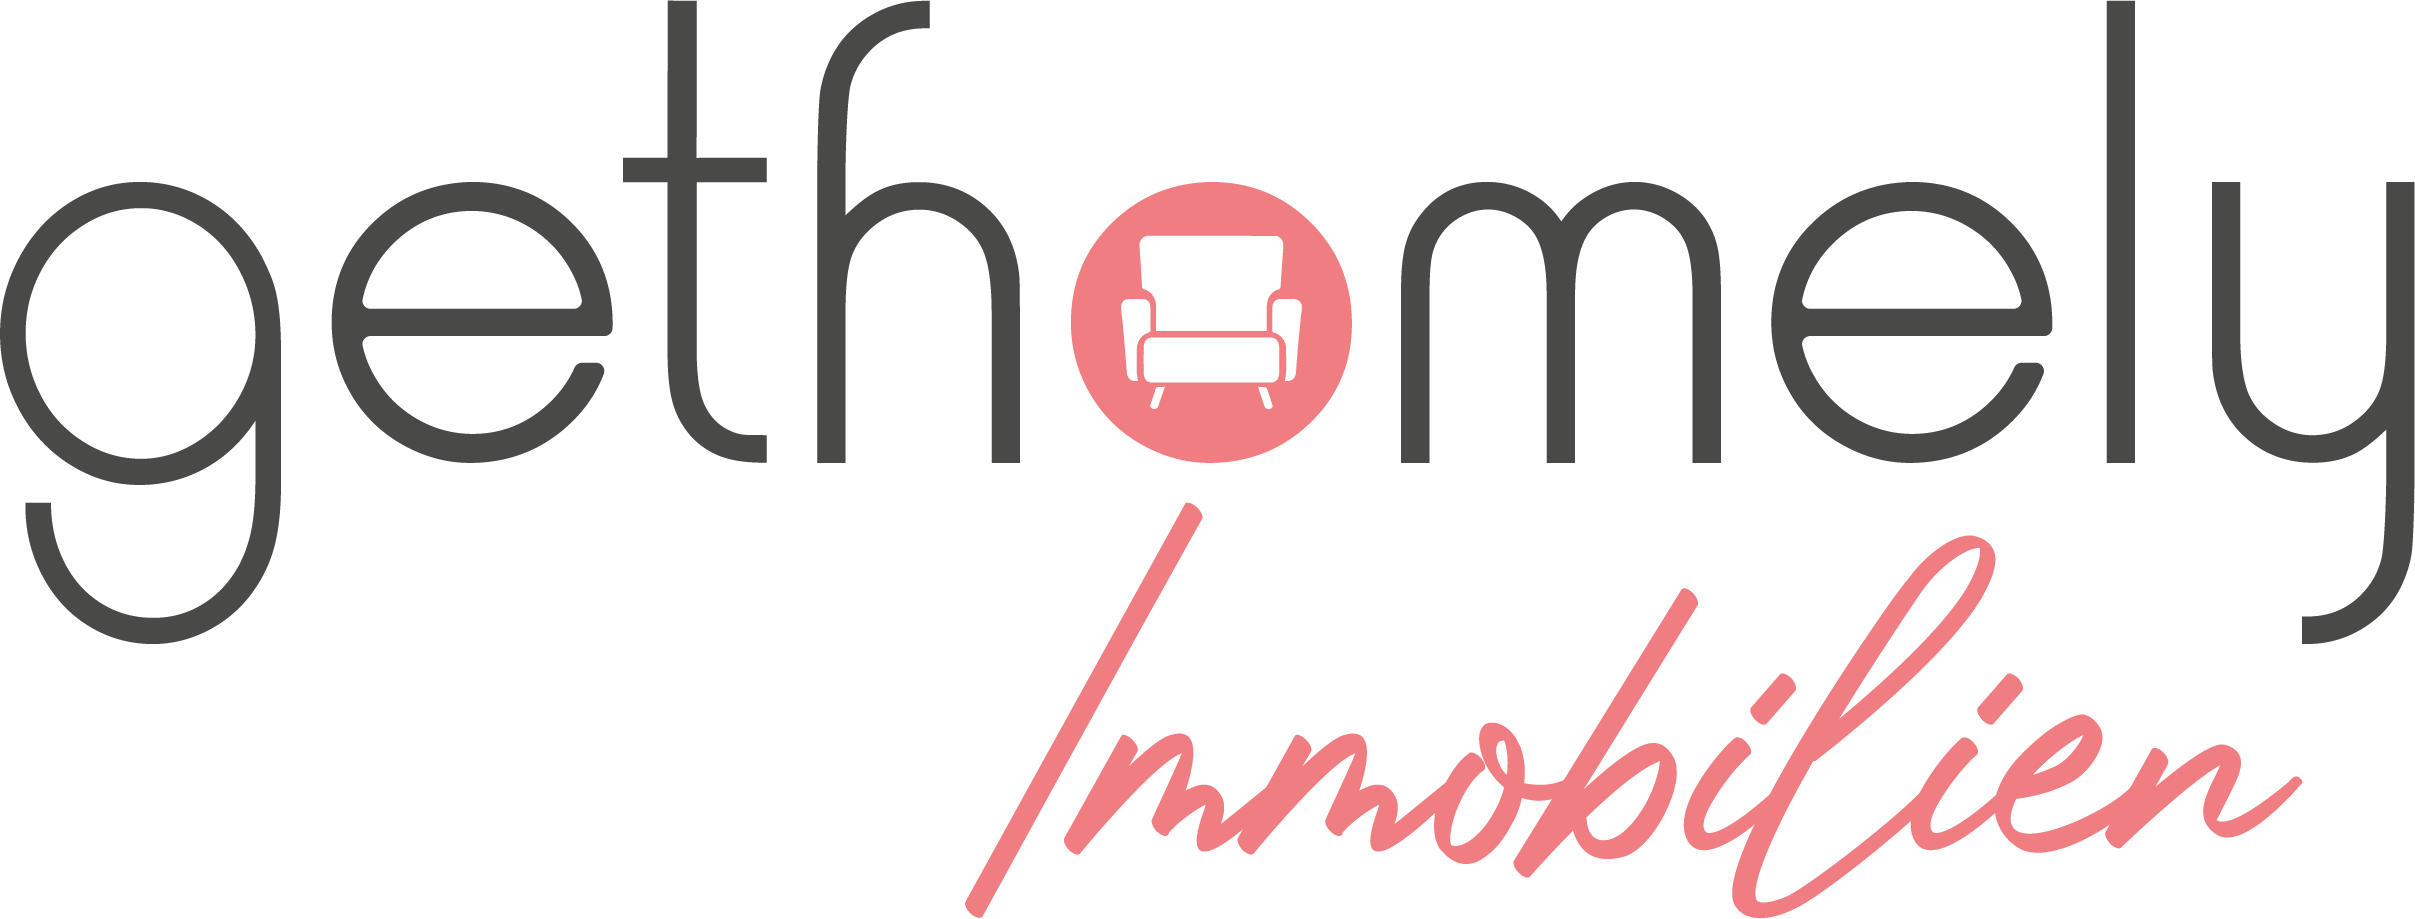 gethomely Immobilien